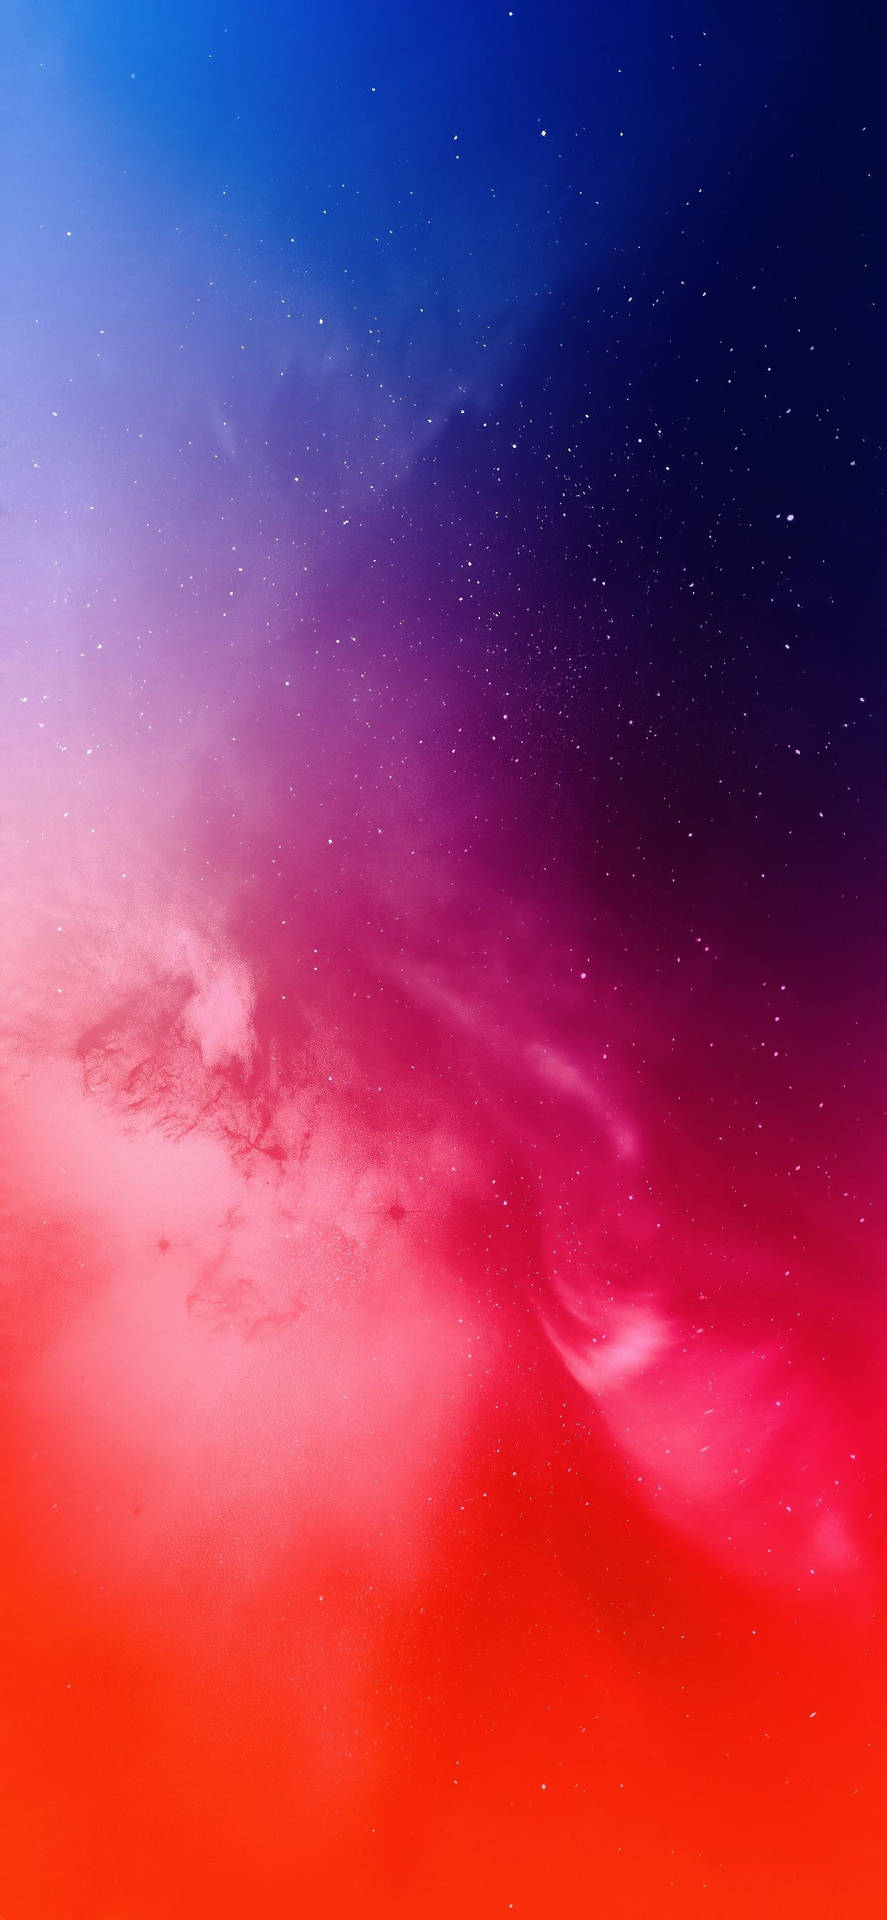 Colorful Space Iphone 11 Pro Max Background